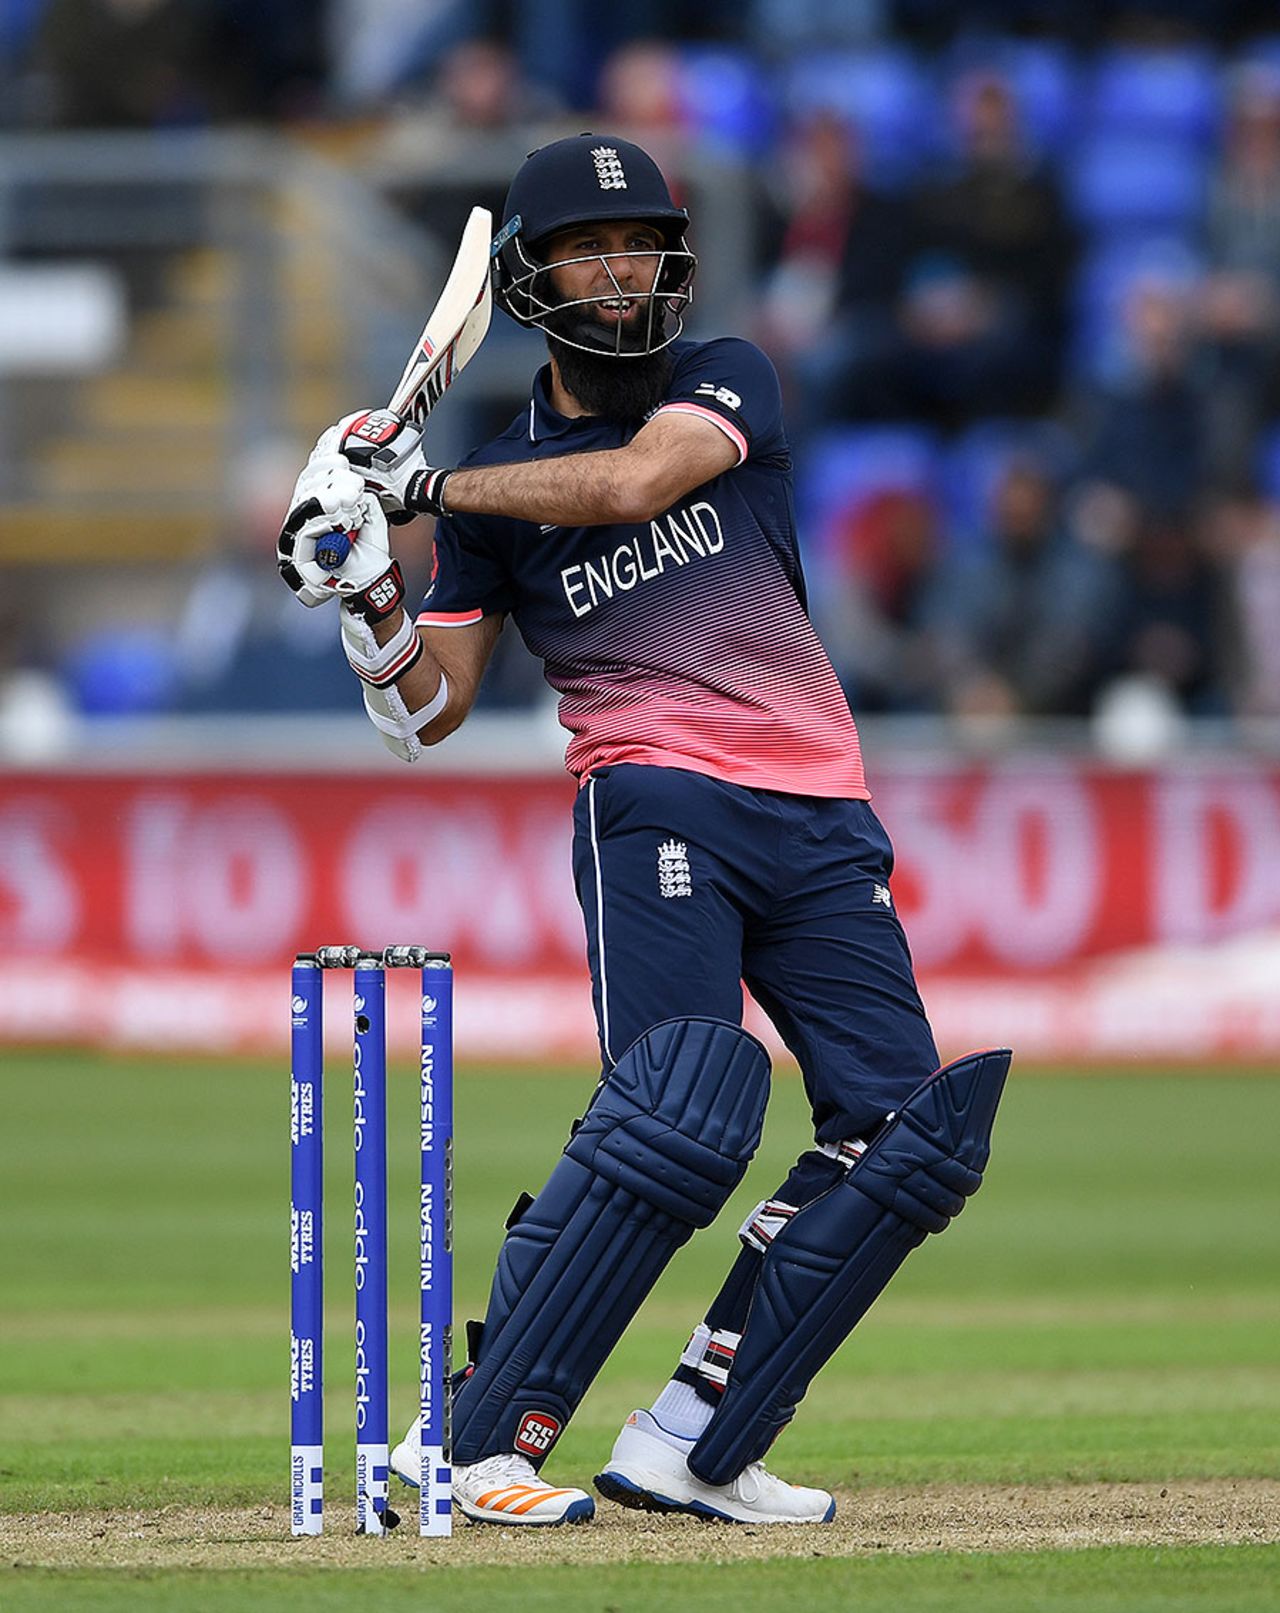 Moeen Ali was looking dangerous until he was well caught at short backward square, England v New Zealand, Champions Trophy 2017, Cardiff, June 6, 2017